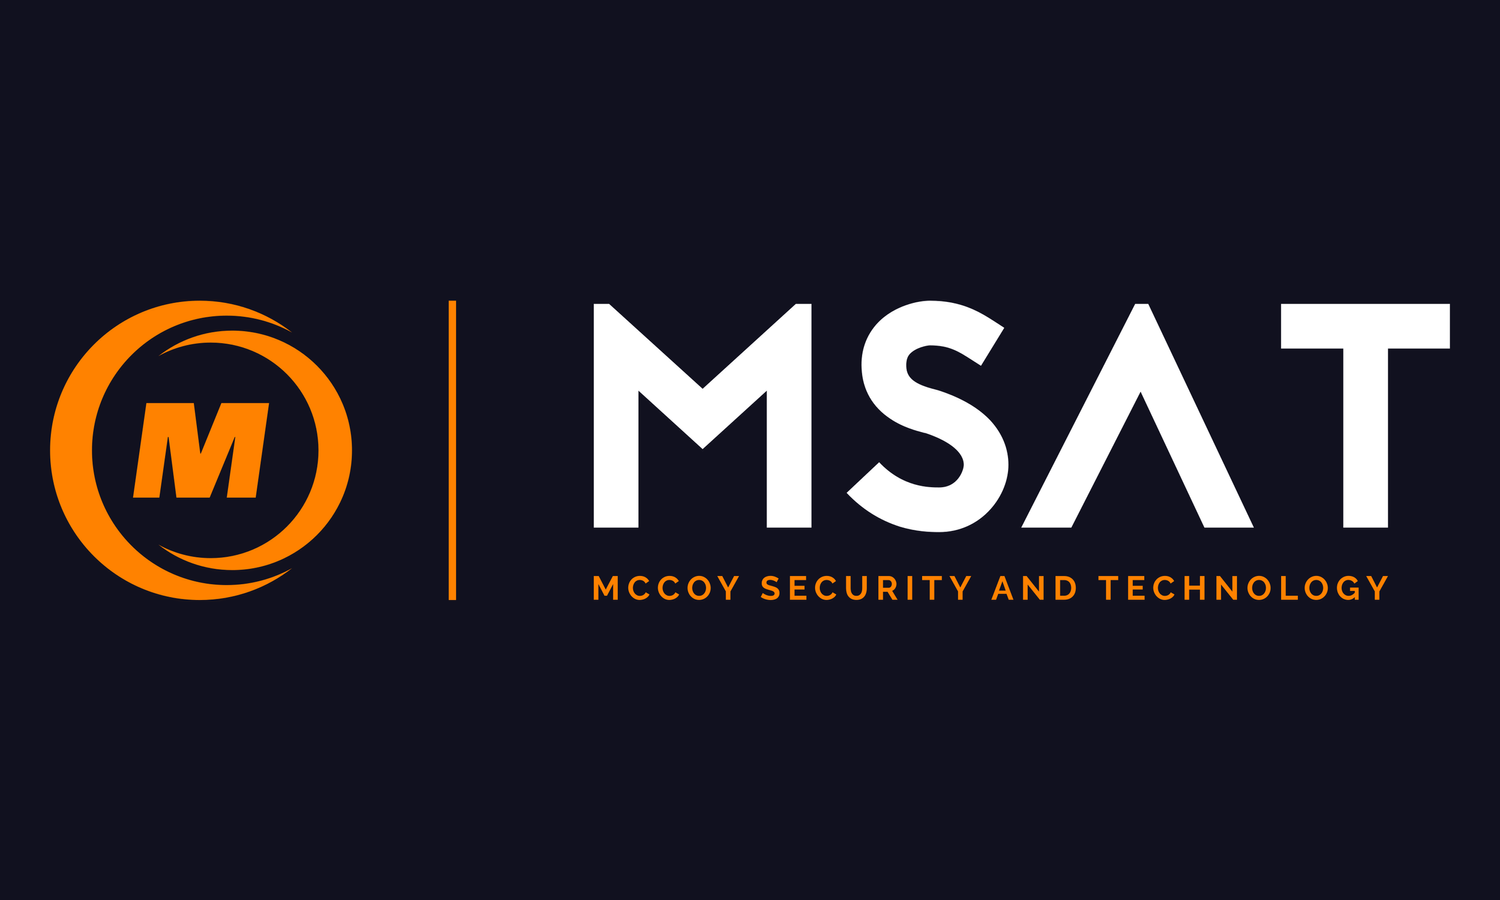 MSAT -McCoy Security and Technology 